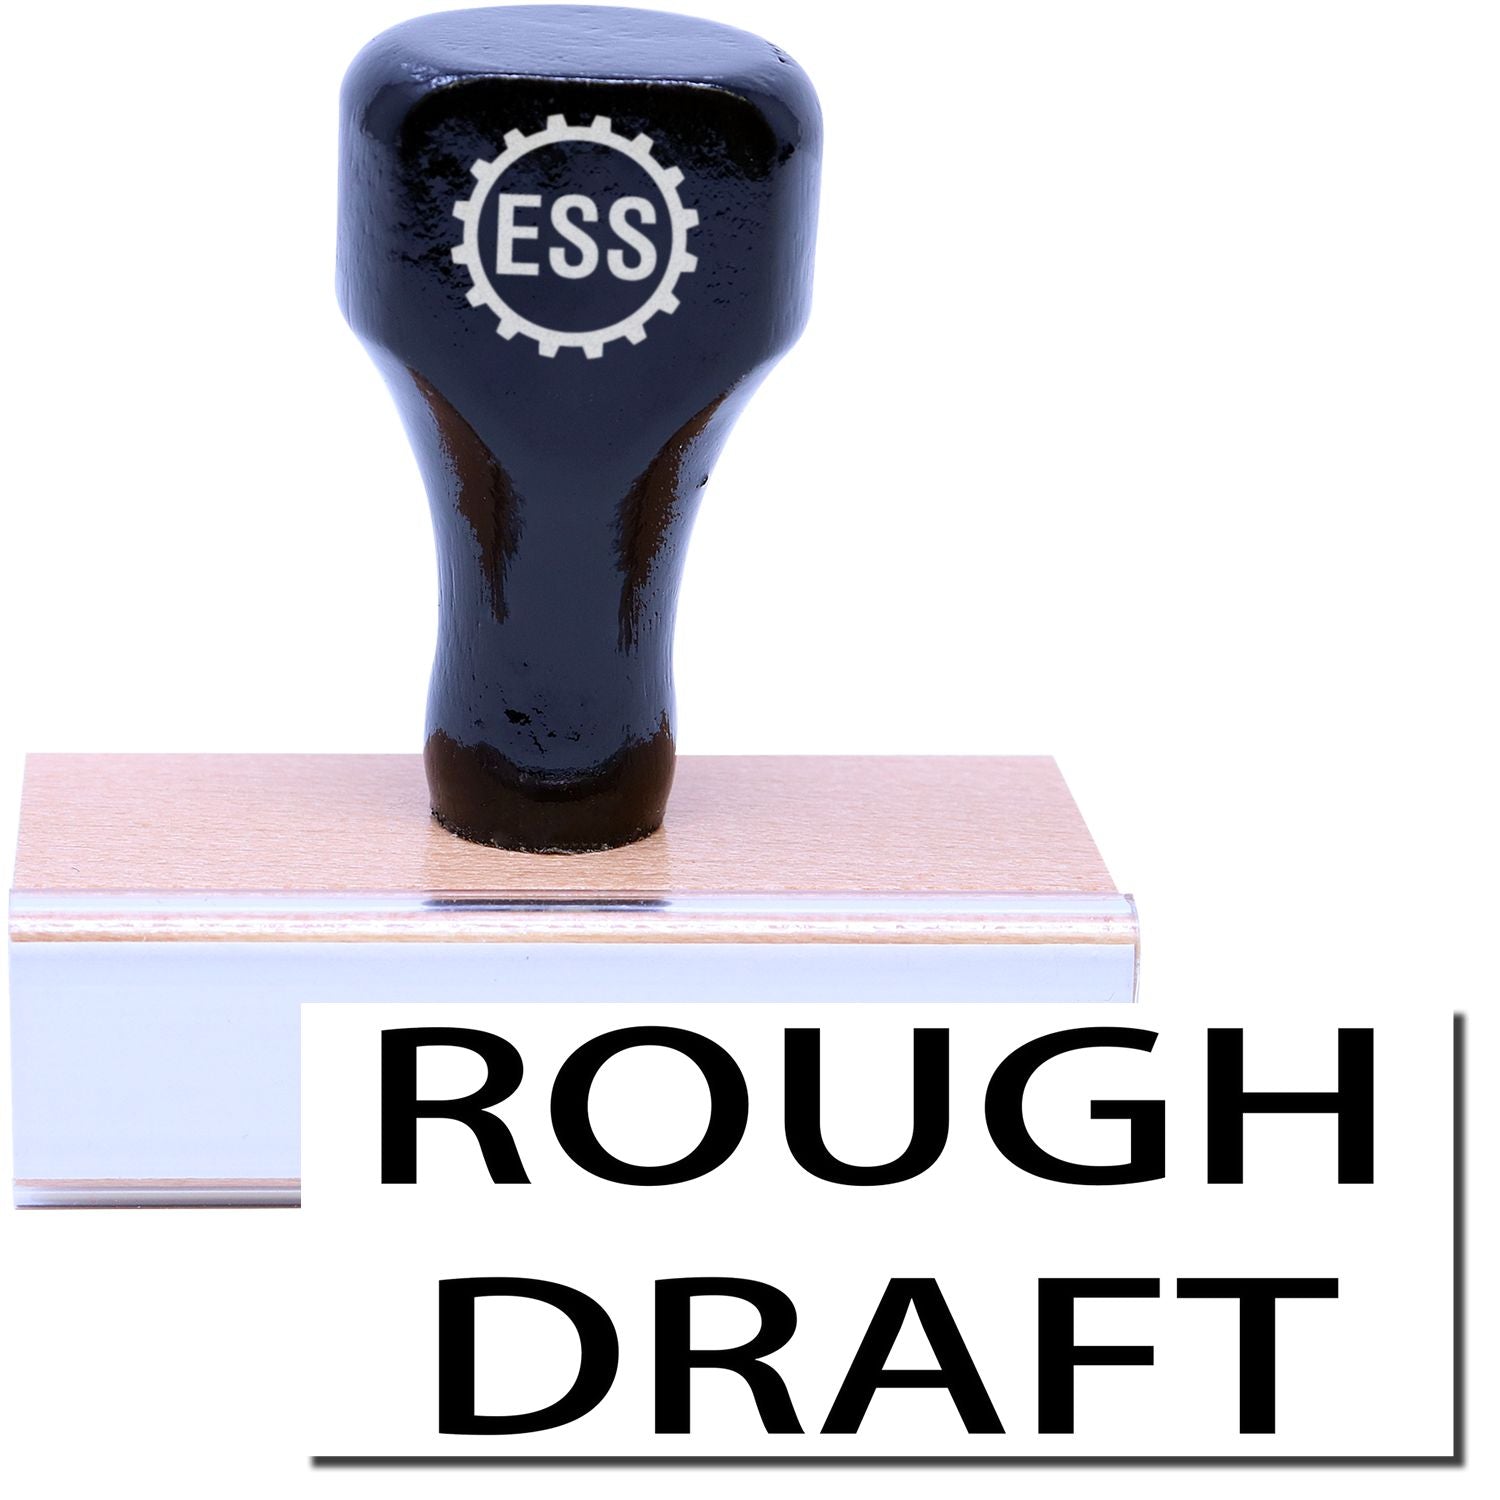 A stock office rubber stamp with a stamped image showing how the text "ROUGH DRAFT" in a large font is displayed after stamping.